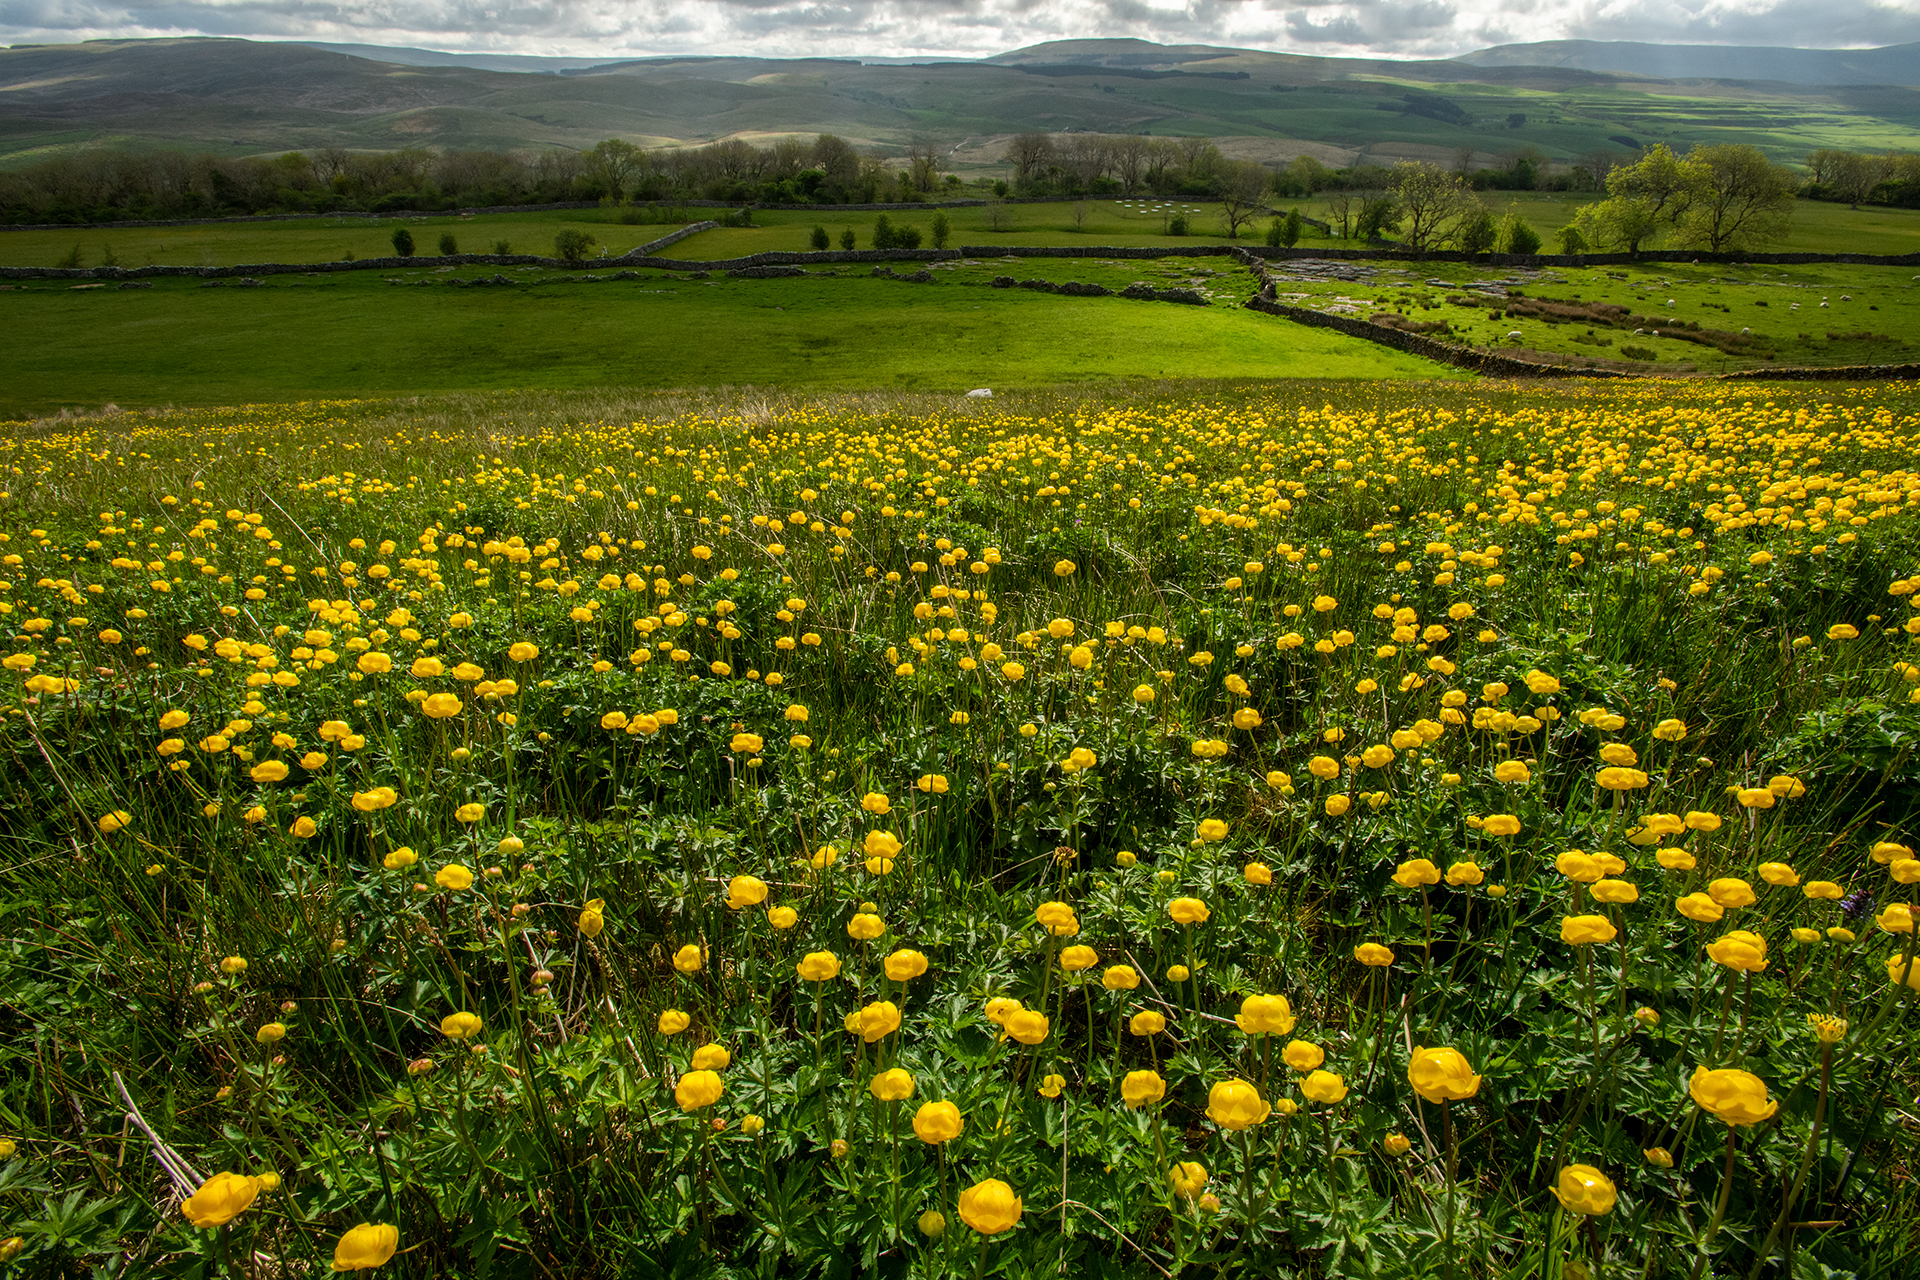 A field filled with globeflowers (Trollius europeaus) in the Wild Ingleborough site.